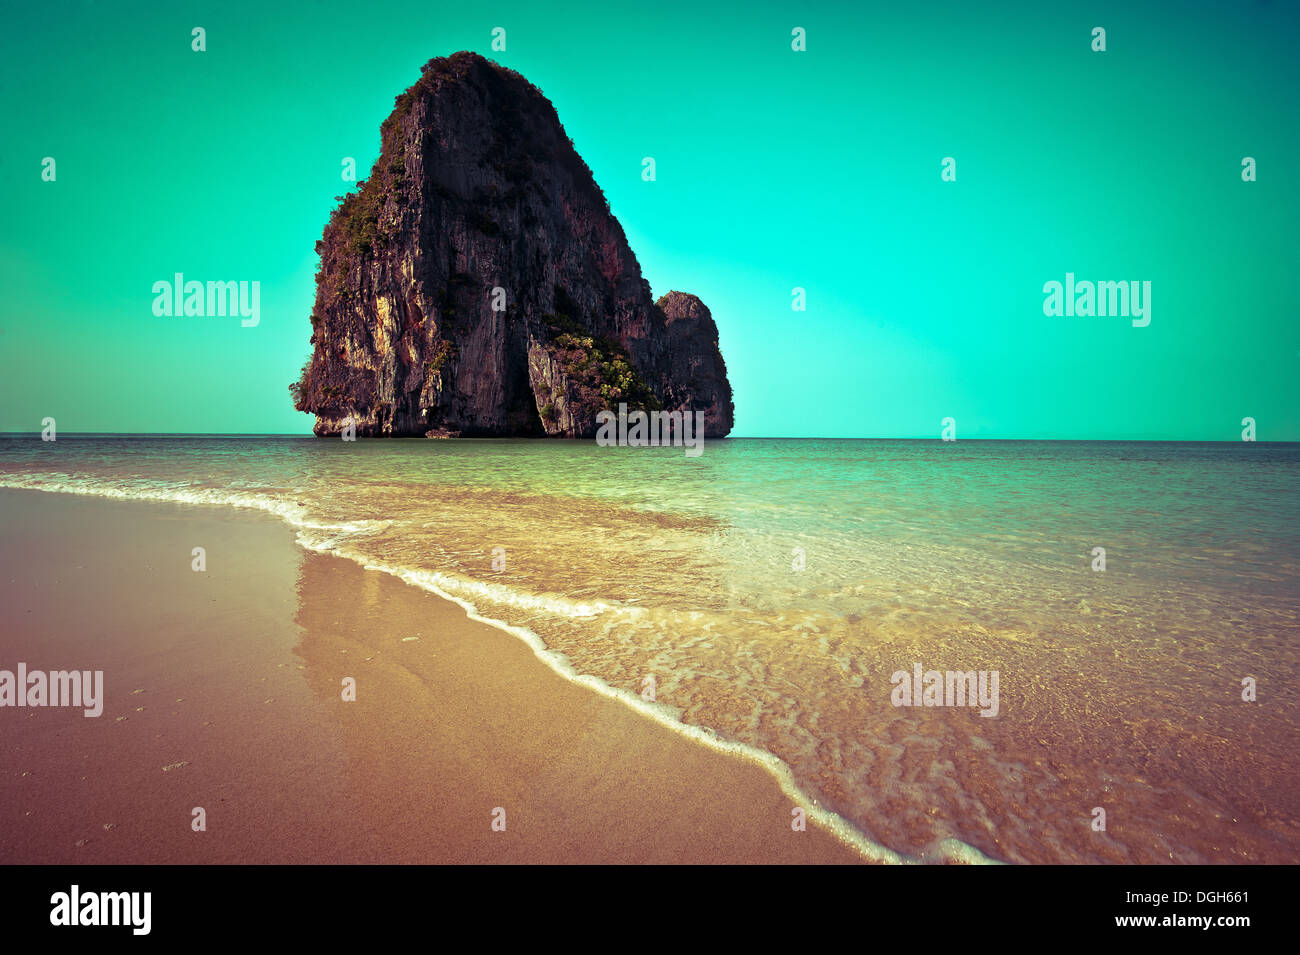 Tropical beach view in vintage style. Ocean landscape with rock formation island at Pranang cave beach, Railay, Krabi, Thailand Stock Photo